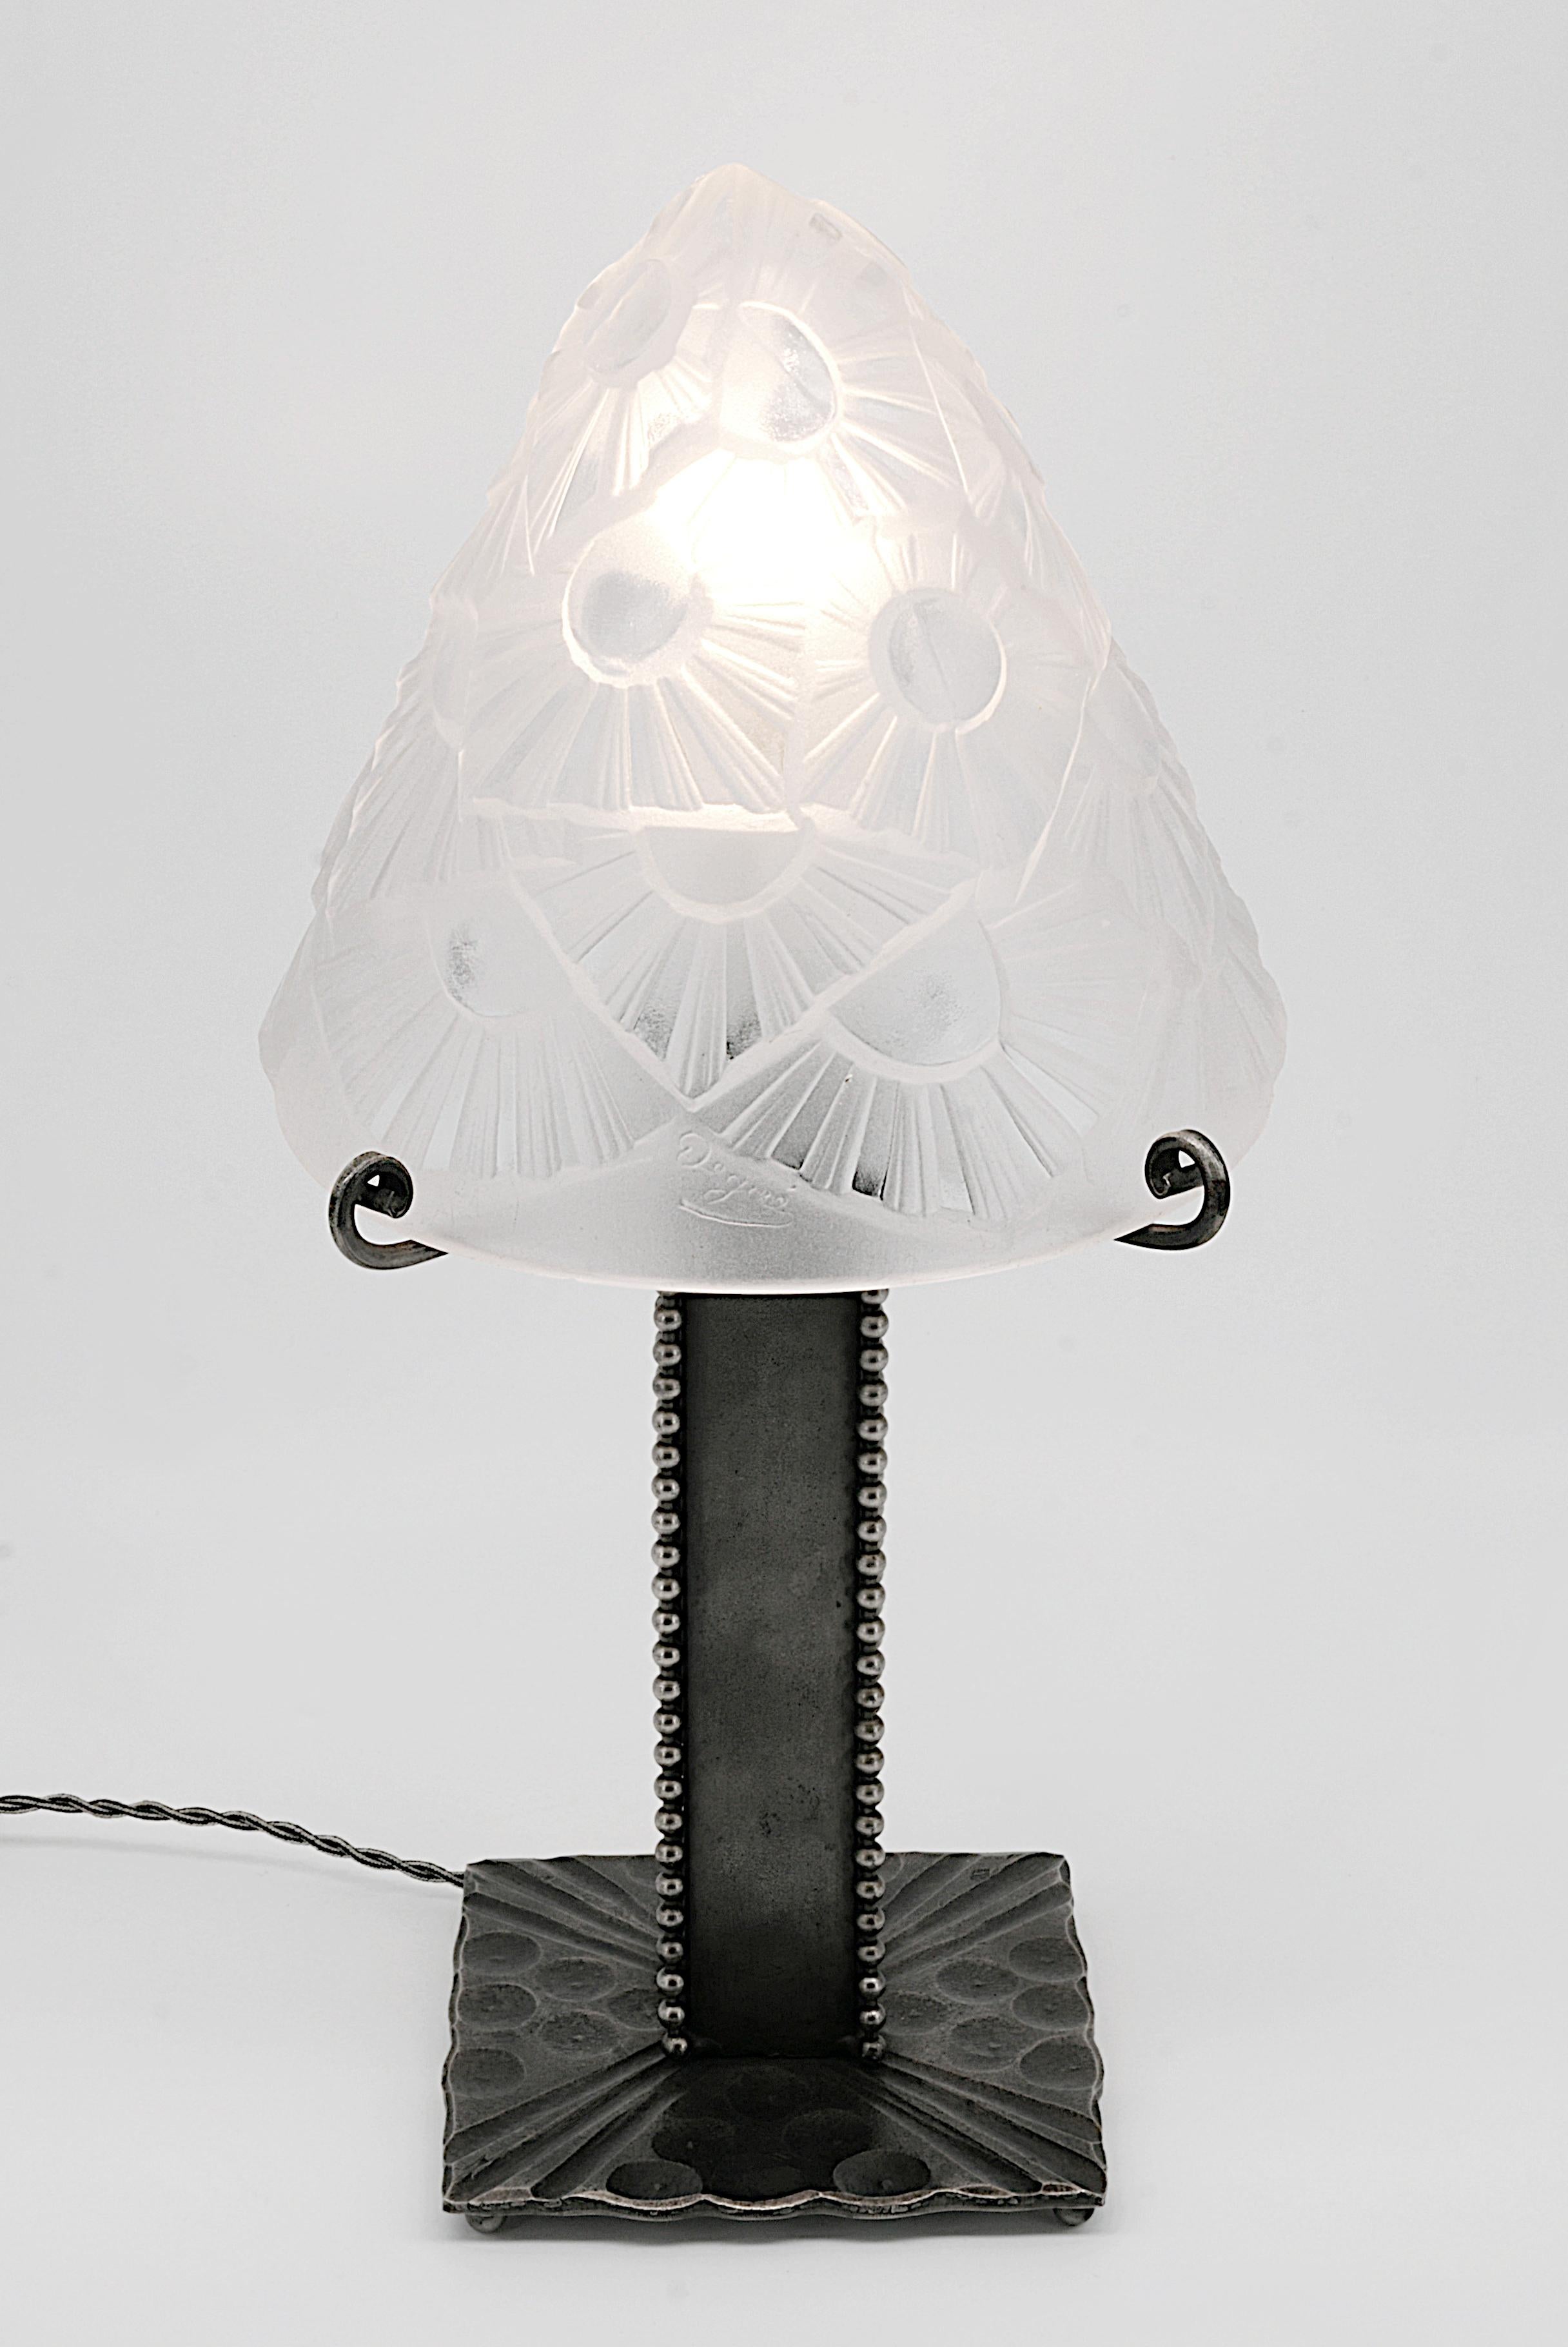 Frosted Degue & Marcel Vasseur French Art Deco Table Lamp, Late 1920s For Sale